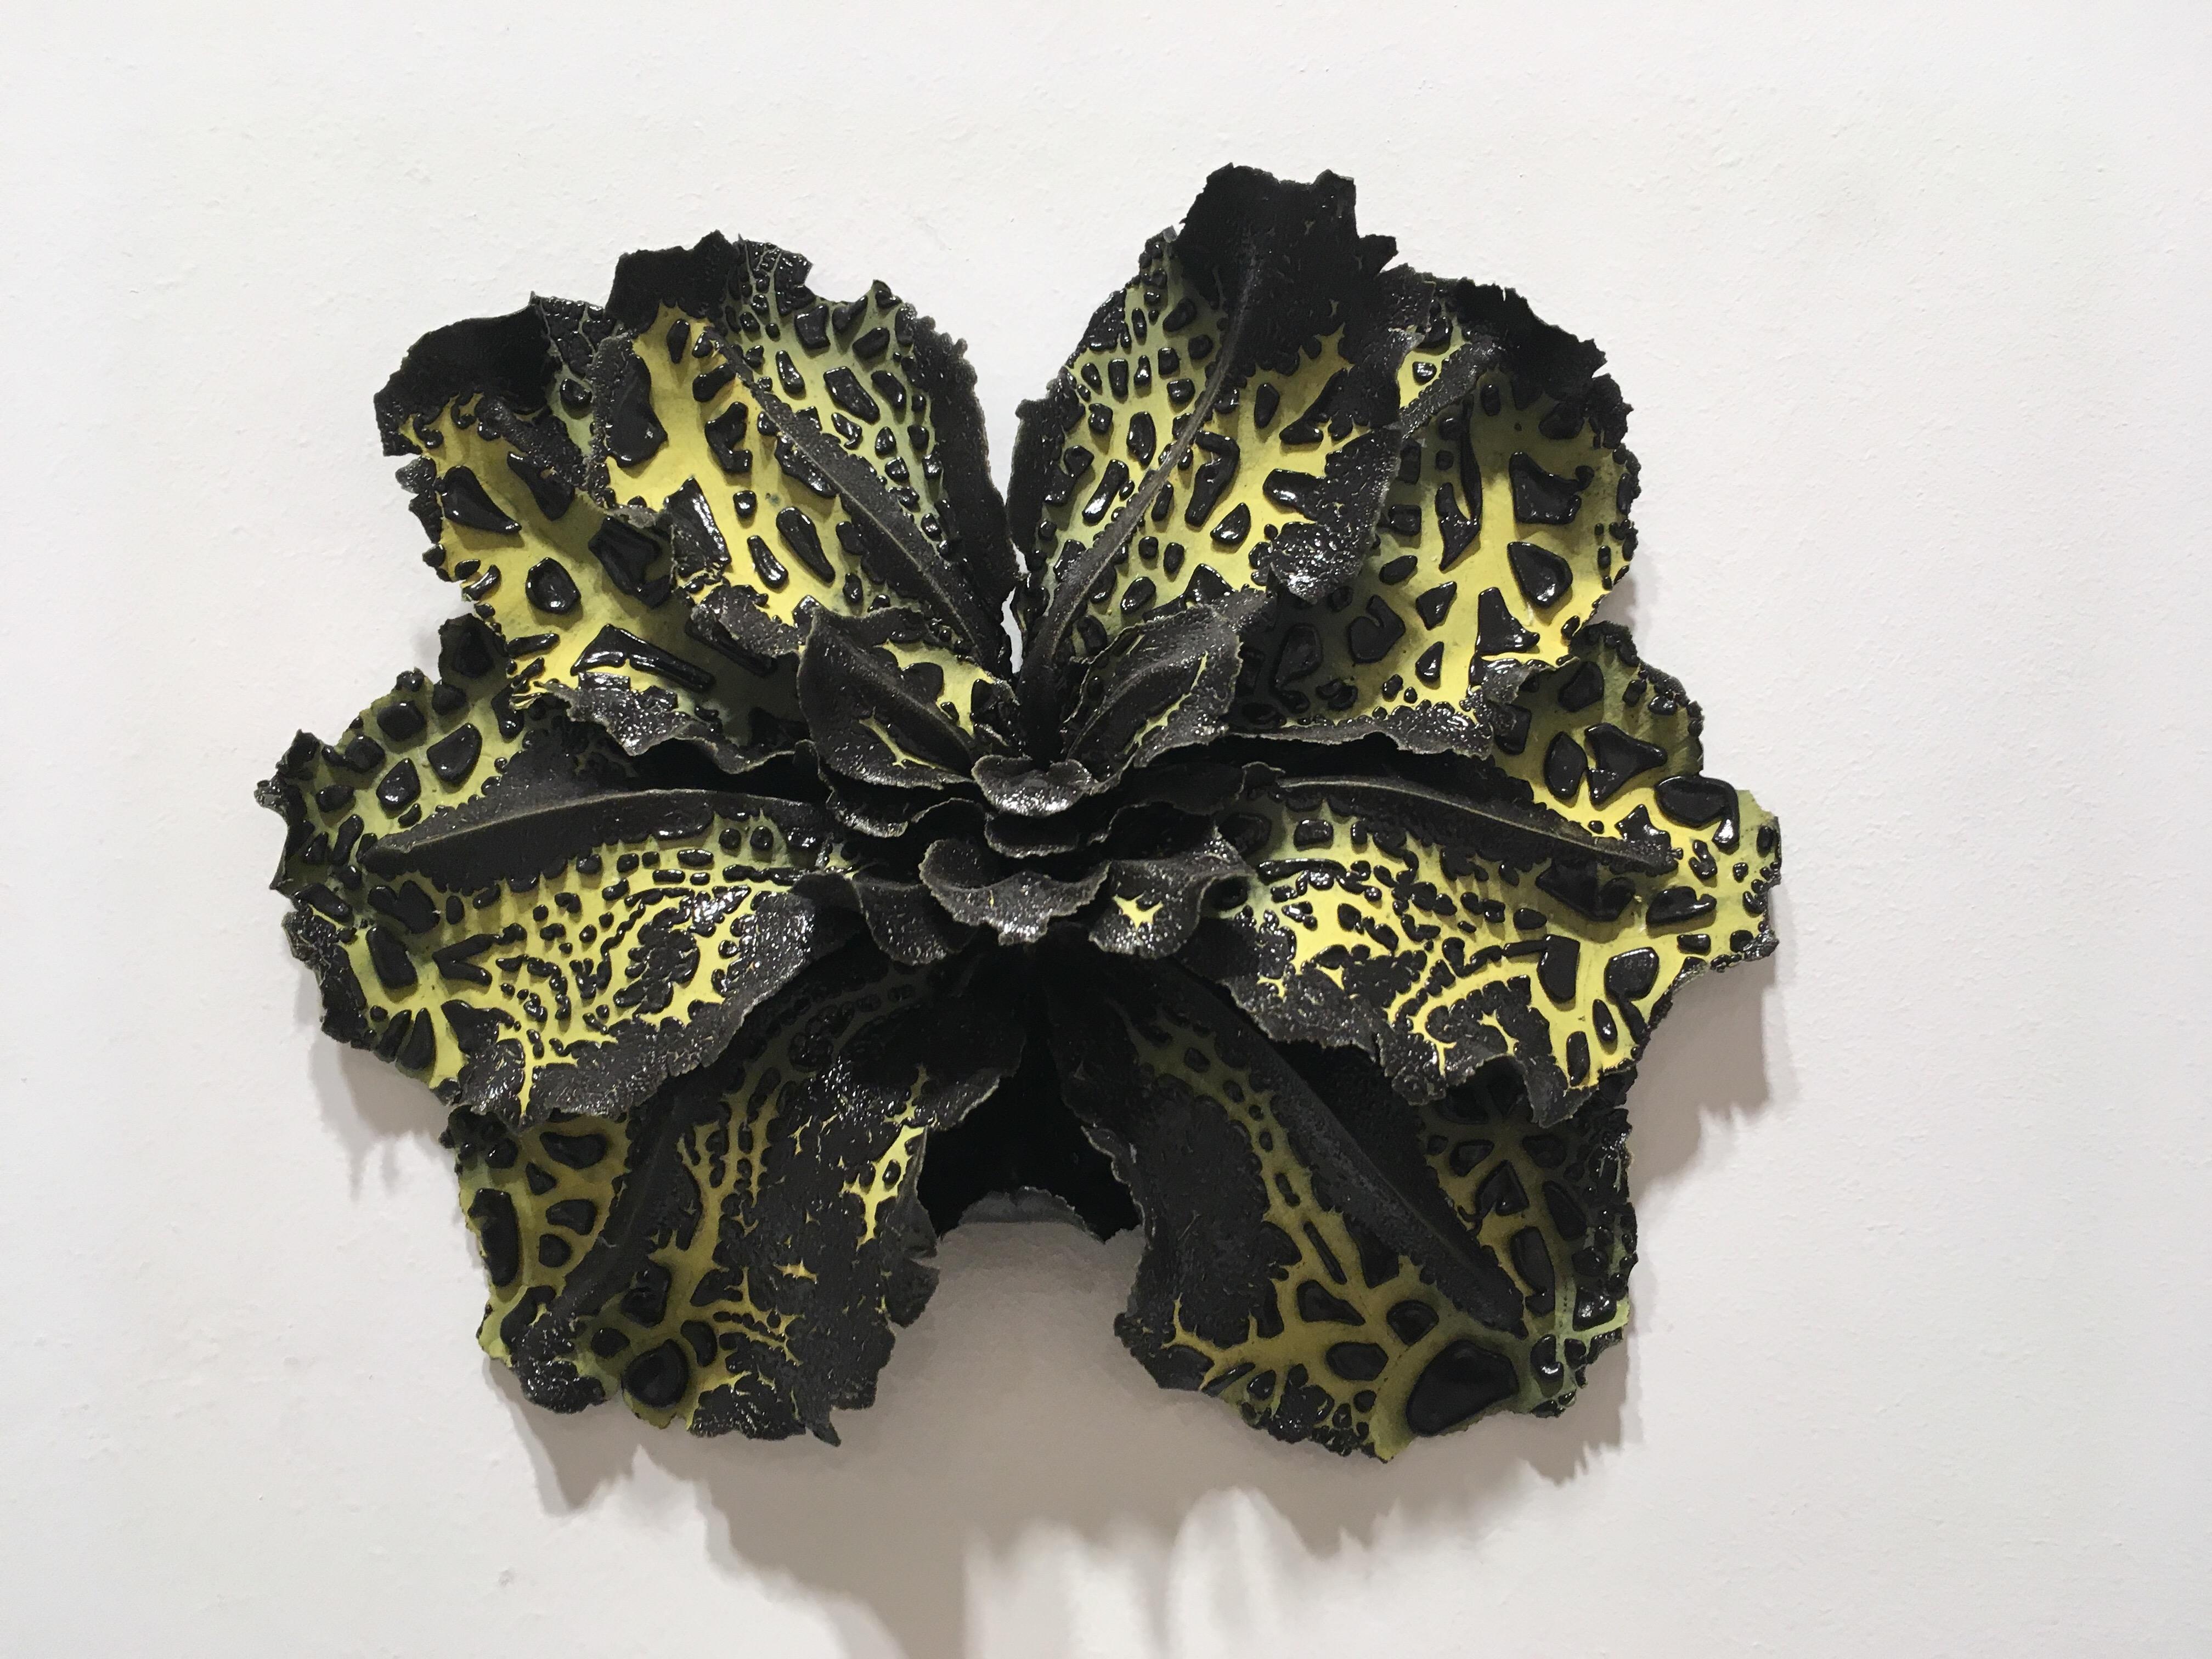 Christopher Adams’s ceramic sculptures play on the concept of adaptive radiation, whereby a pioneering organism enters an untapped environment and then differentiates rapidly without departing too much from its original form. While they have a